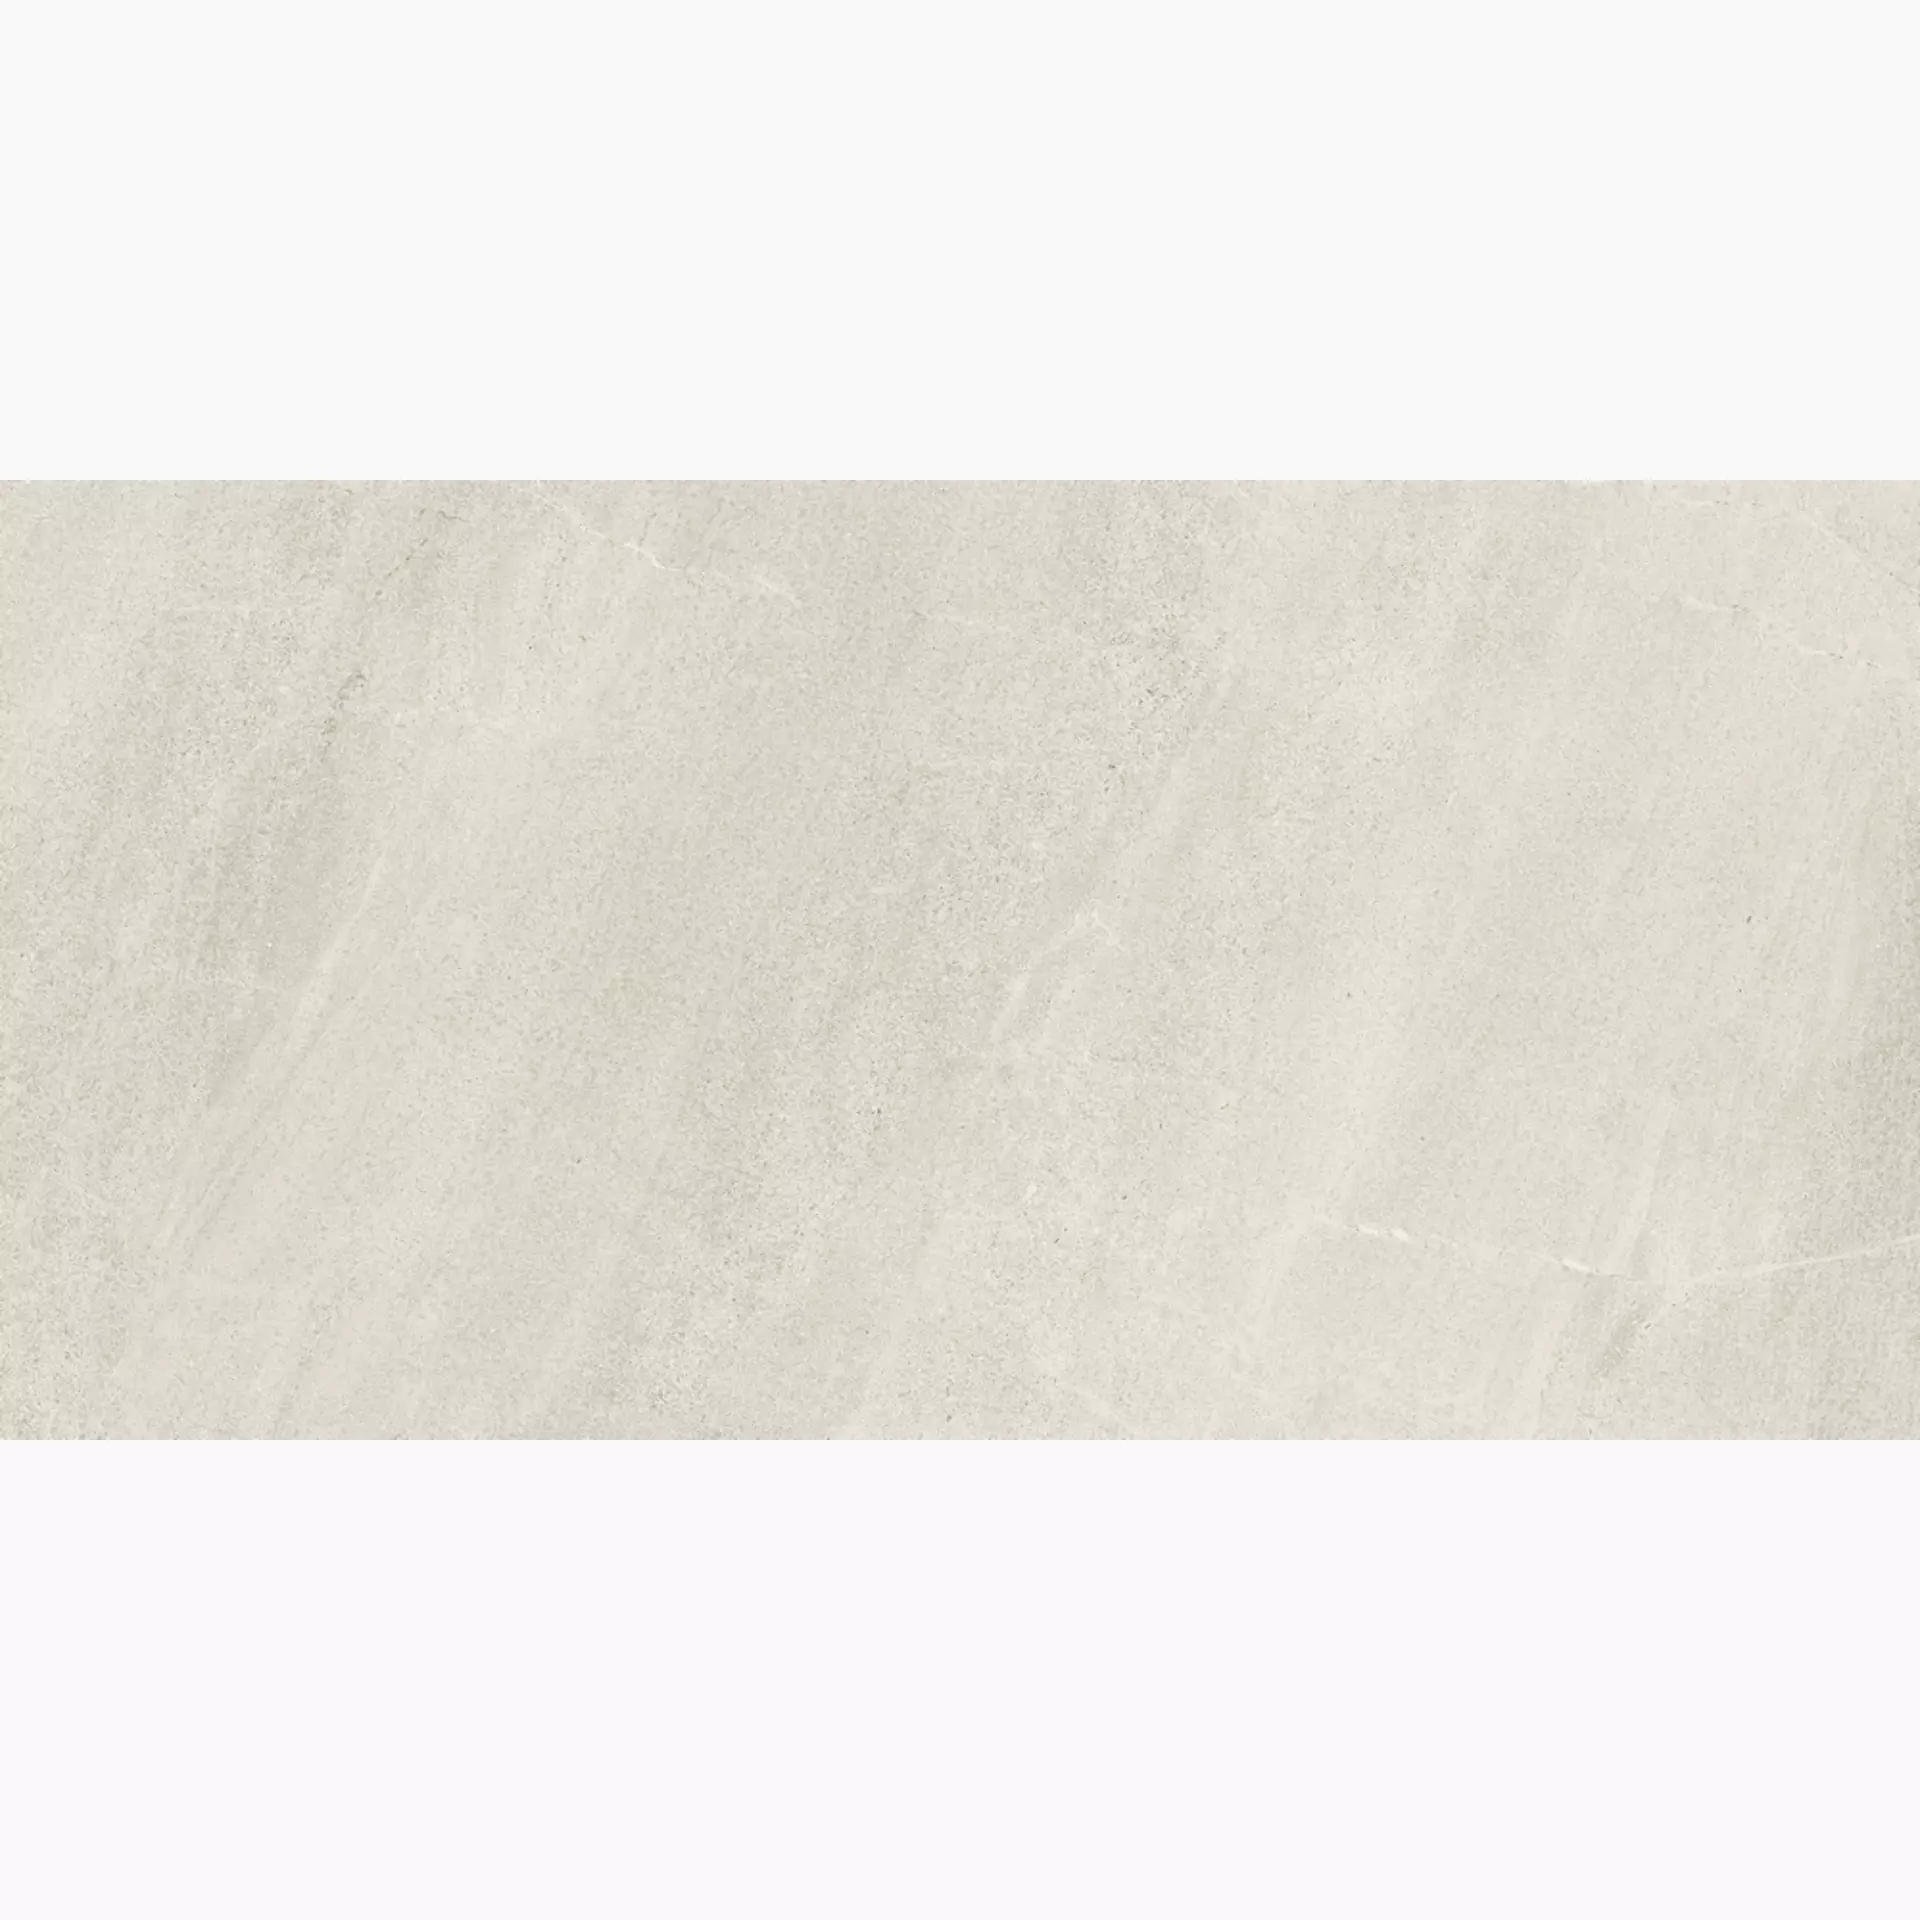 Cottodeste Limestone Clay Naturale Protect EGXLS11 60x120cm rectified 14mm